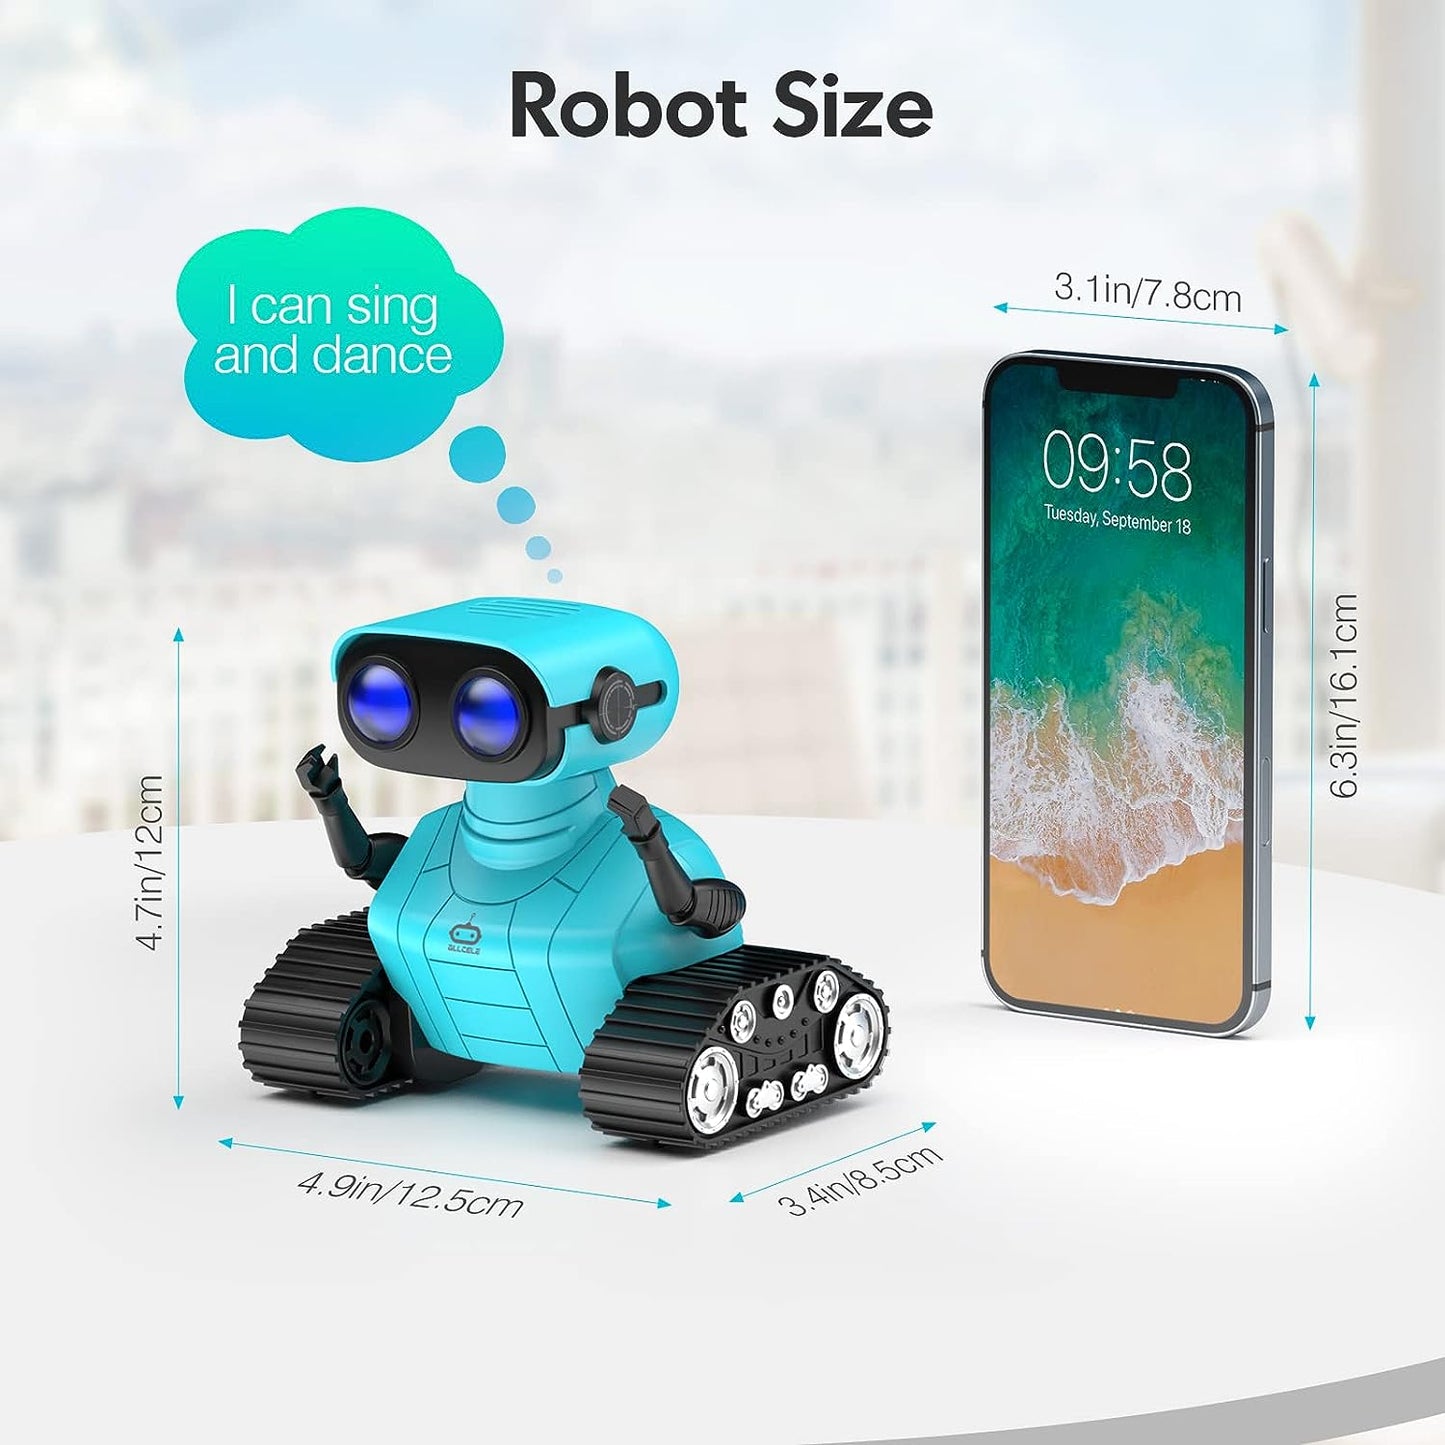 Robot Toys, Rechargeable RC Robots for Kids Boys, Remote Control Toy with Music and LED Eyes, Gift for Children Age 3 Years and Up - Yellow